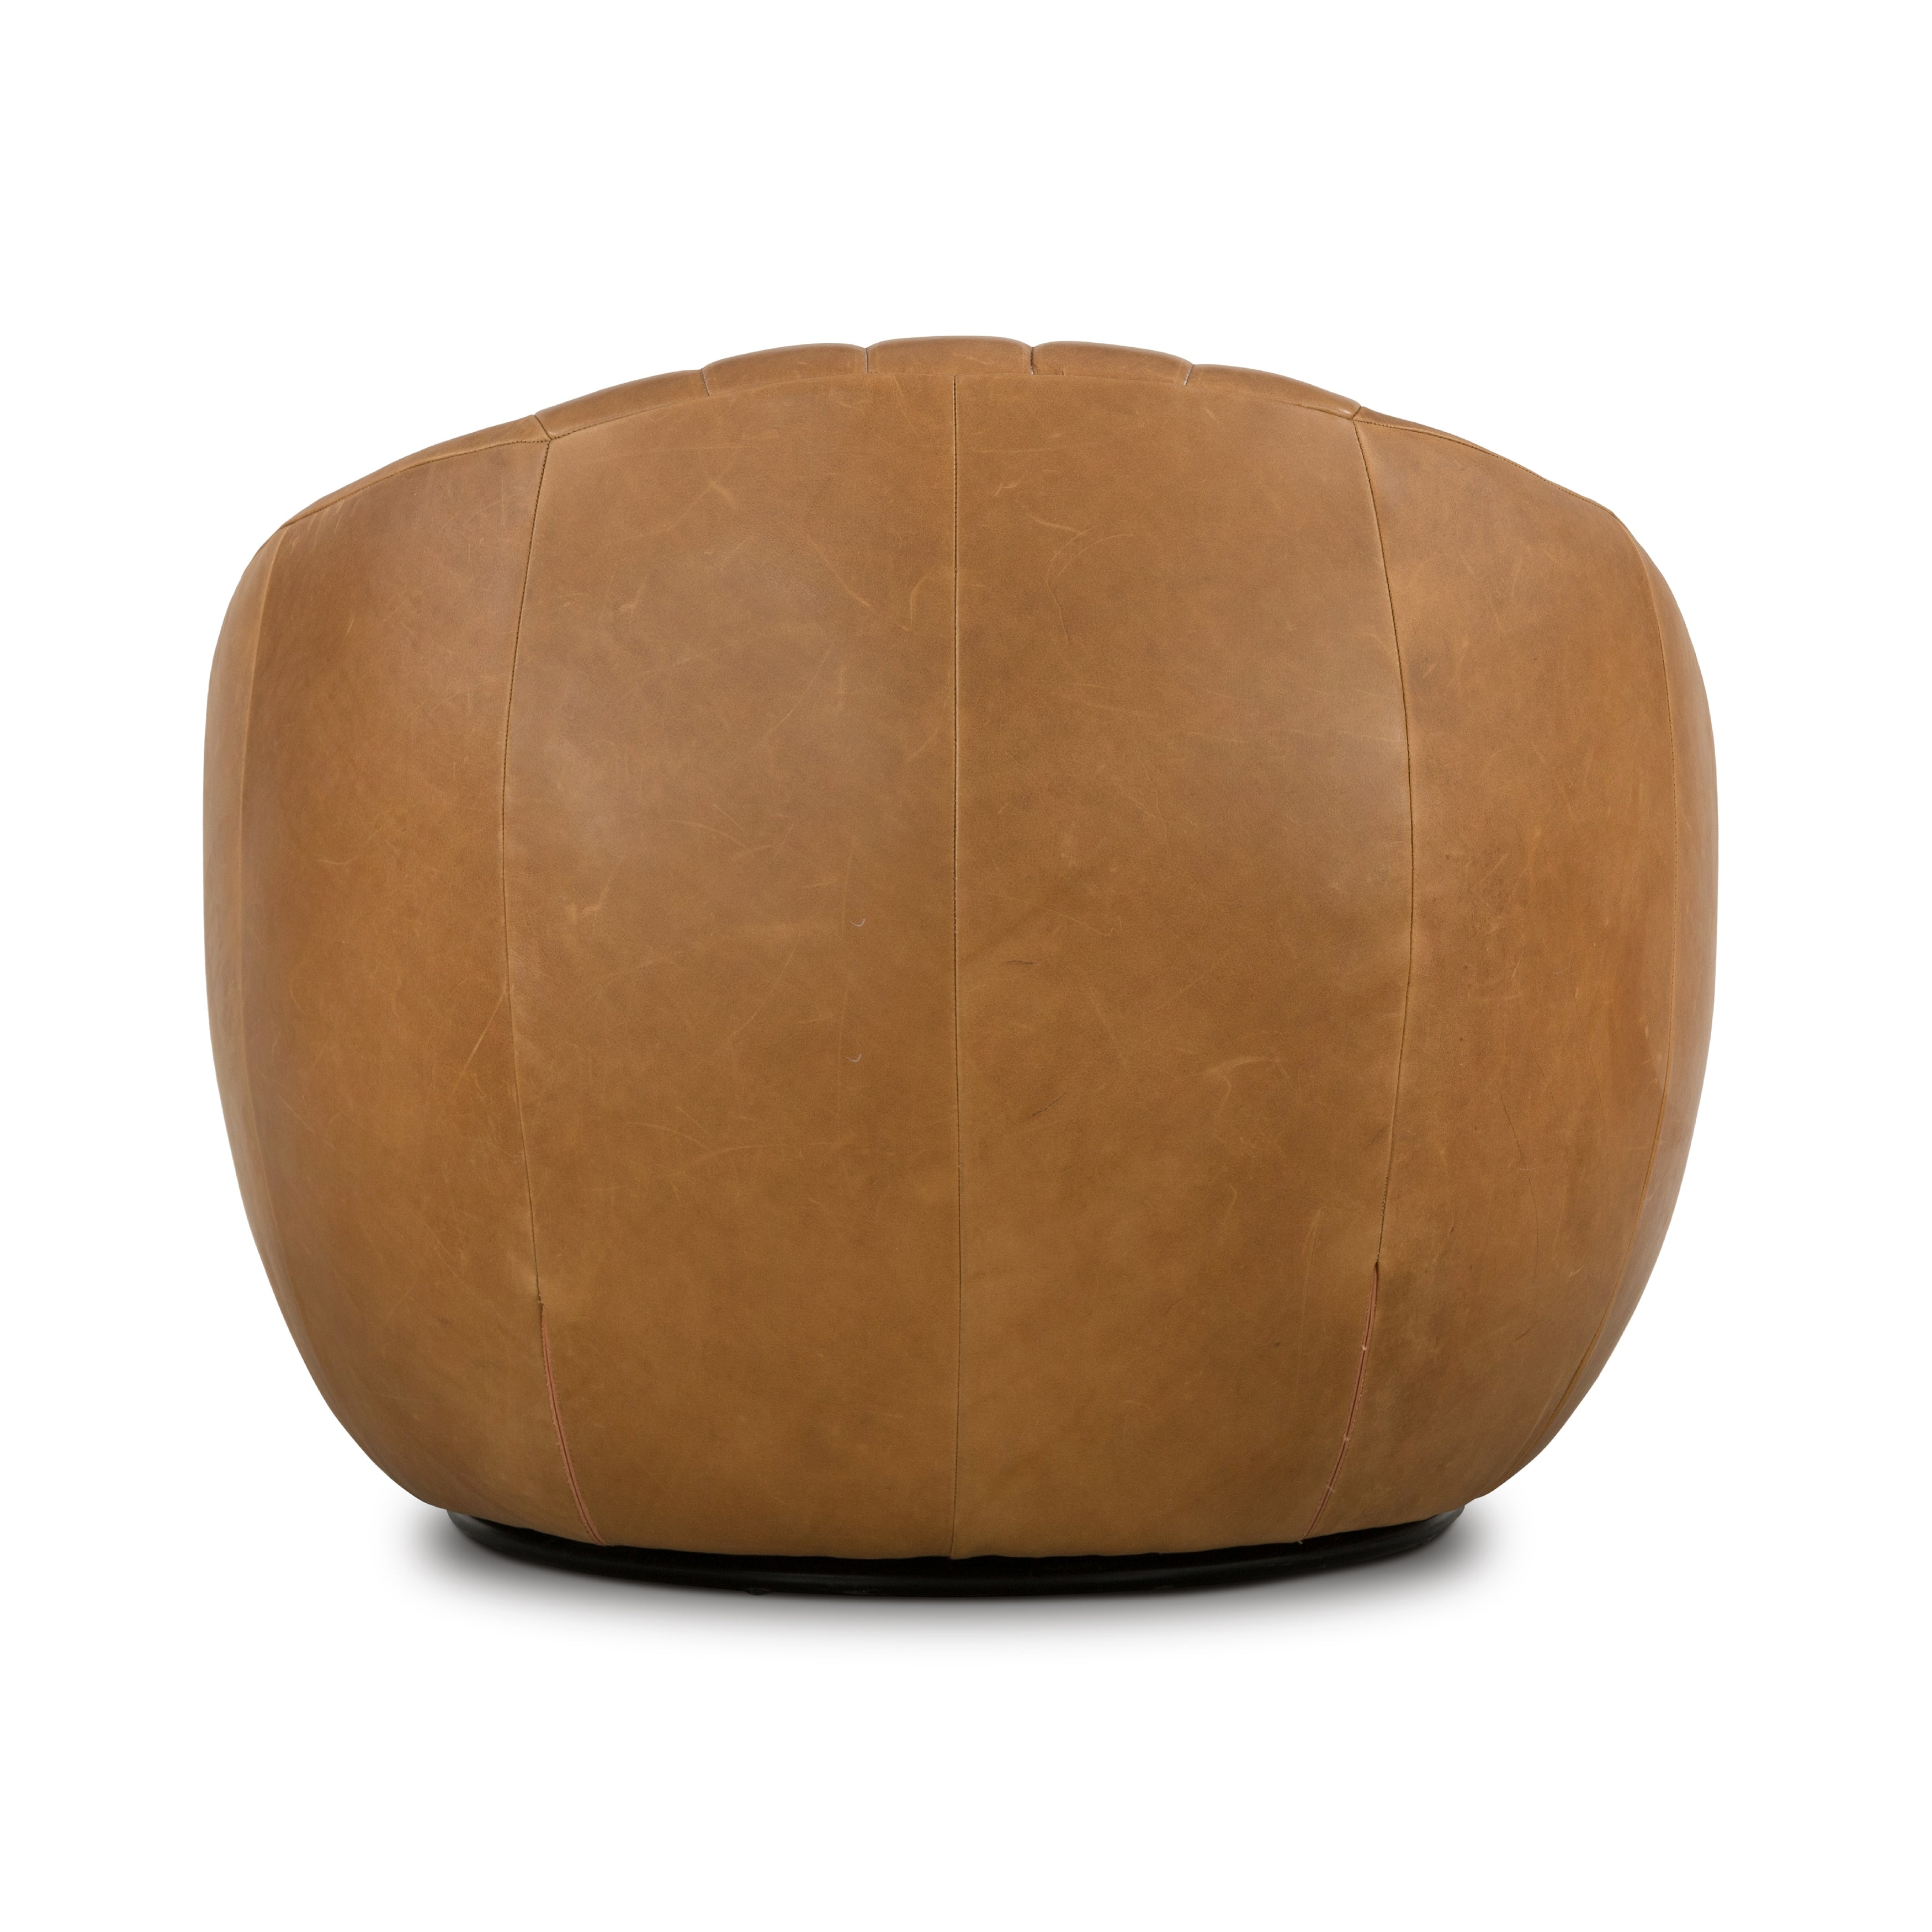 The Audie Heirloom Sienna Swivel Chair is made of heirloom leather that is salvaged and processed from upcycled hides featuring an abundance of natural markings, scars, and color variations. The result? Supple, buttery-soft hides with an unmatched depth of color and authentic lived-in look. Amethyst Home provides interior design services, furniture, rugs, and lighting in the Kansas City metro area.